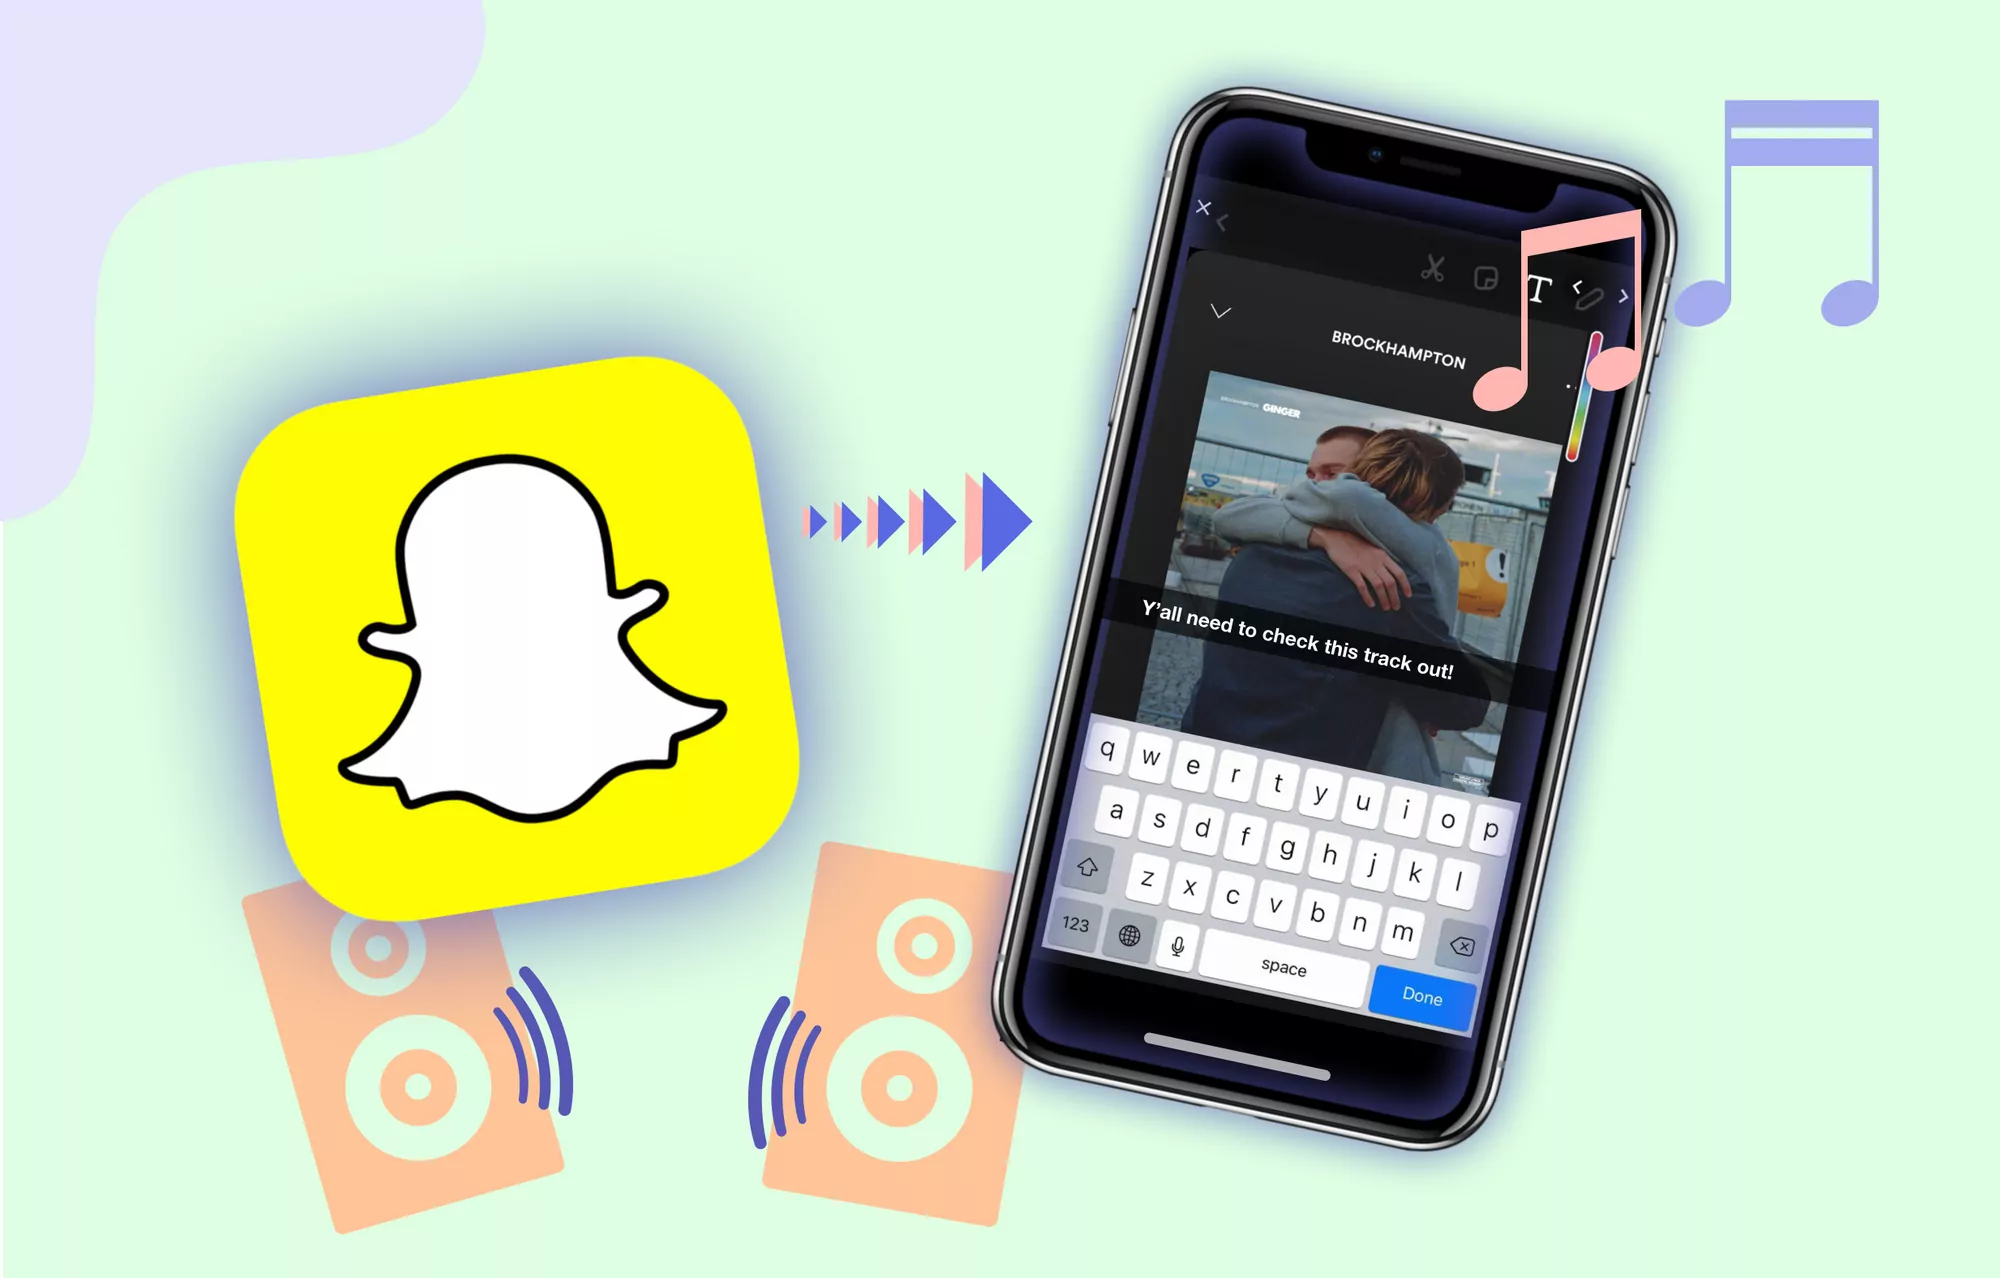 How To Share YouTube Music On Snapchat